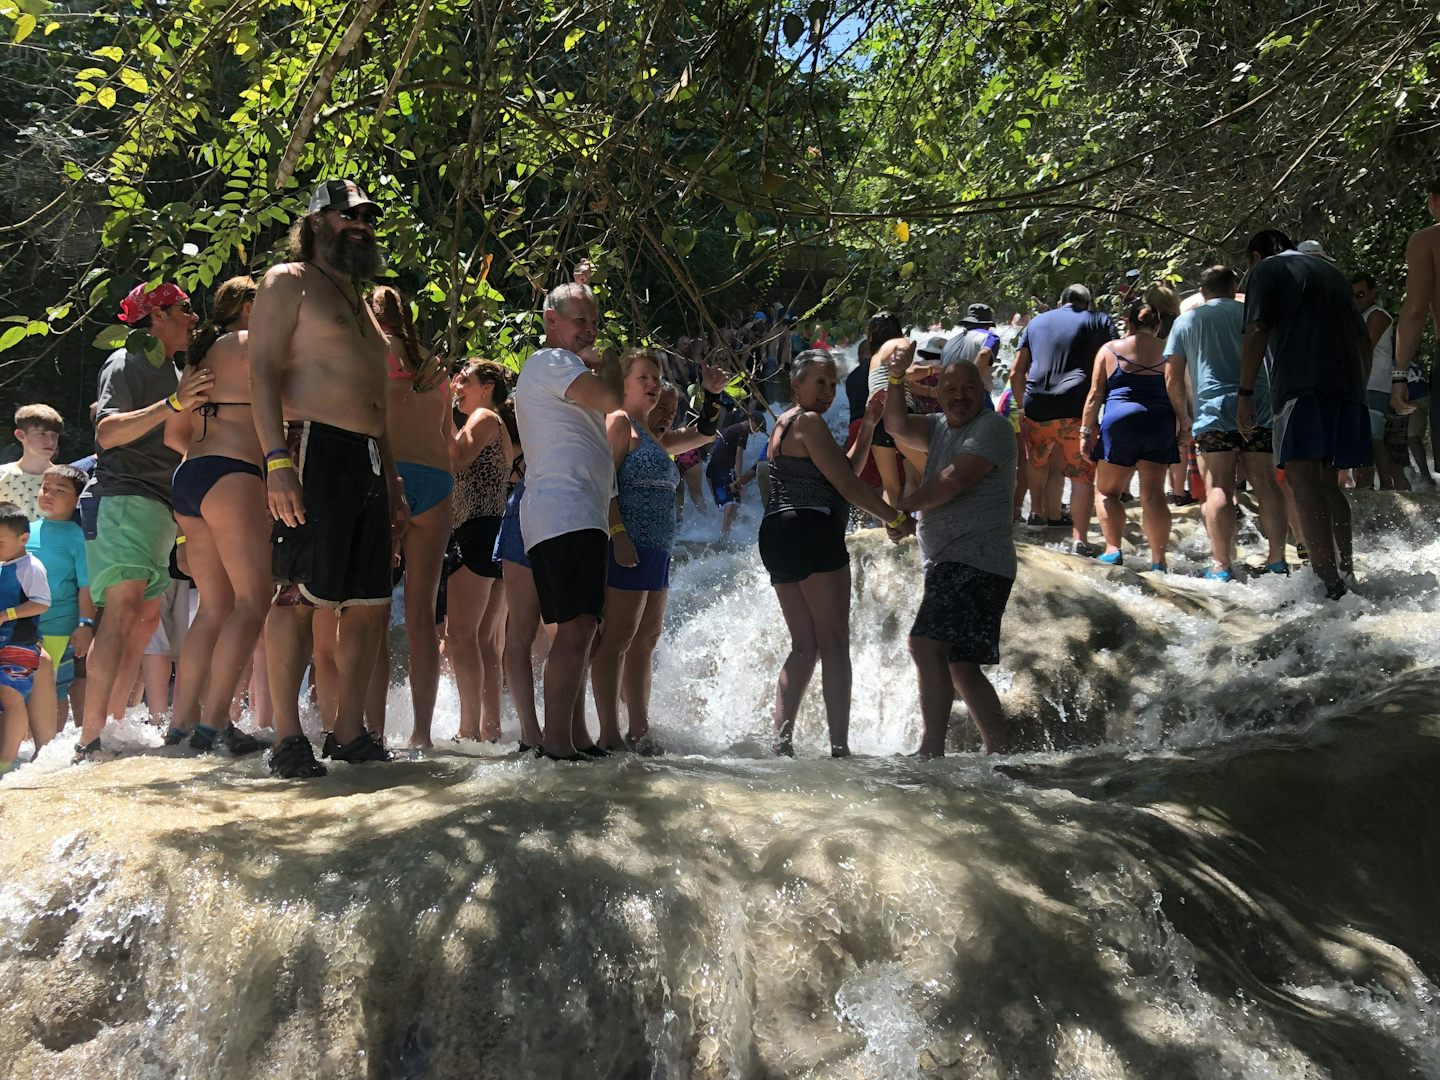 Making our way up the Dunn's River Falls on a busy day. BEAUTIFUL and F